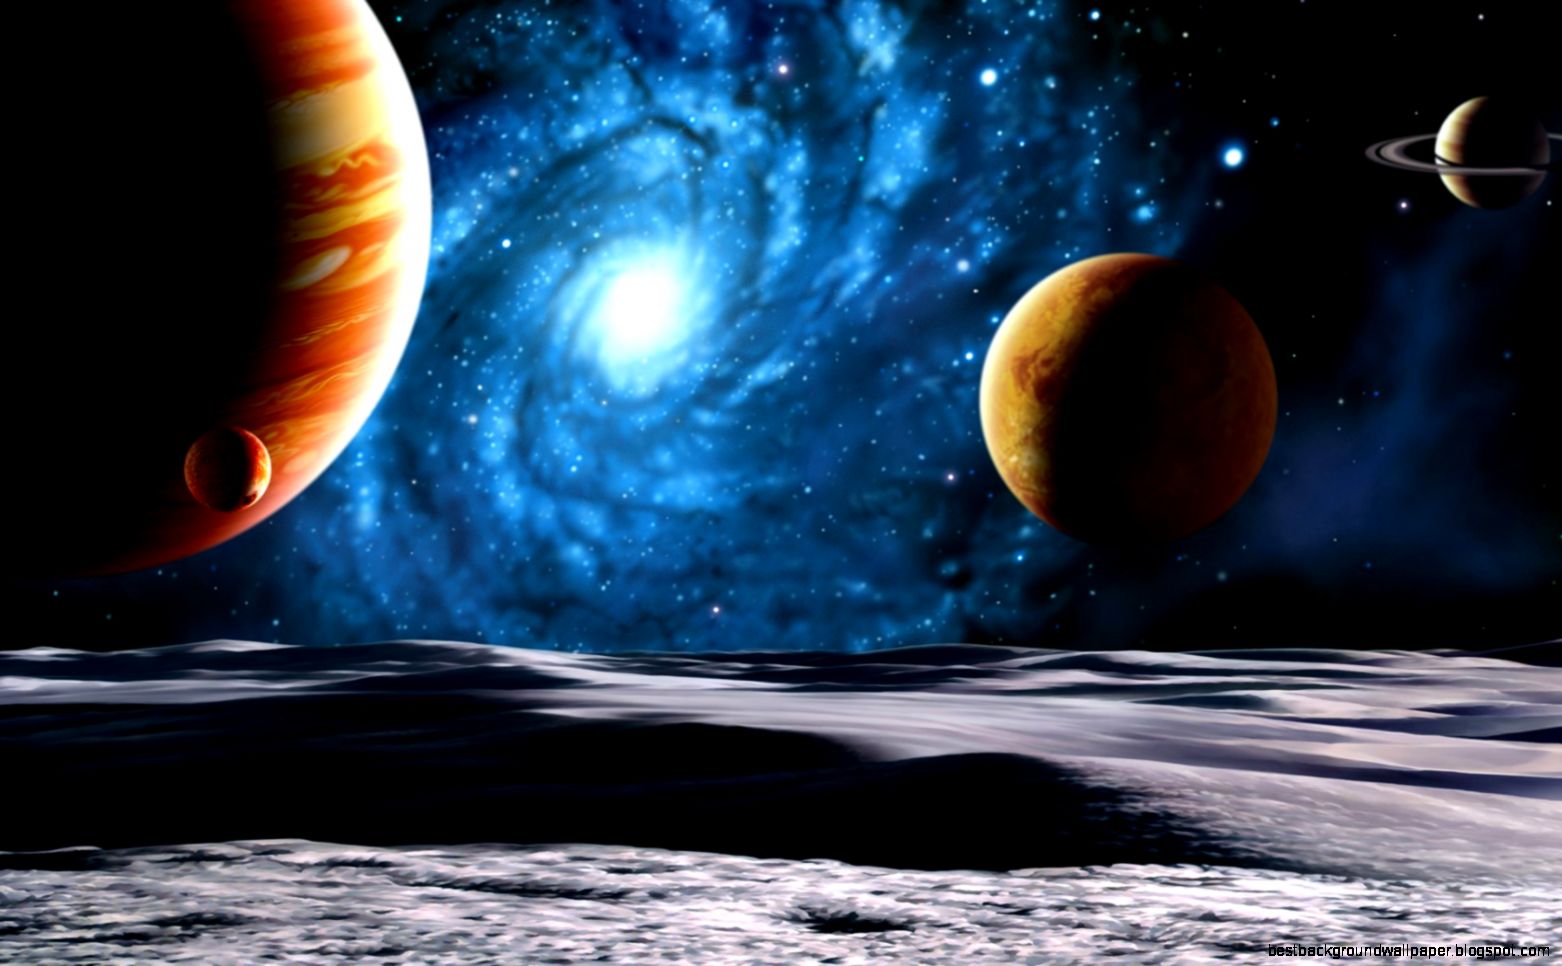 Outer Space Planets Wallpaper